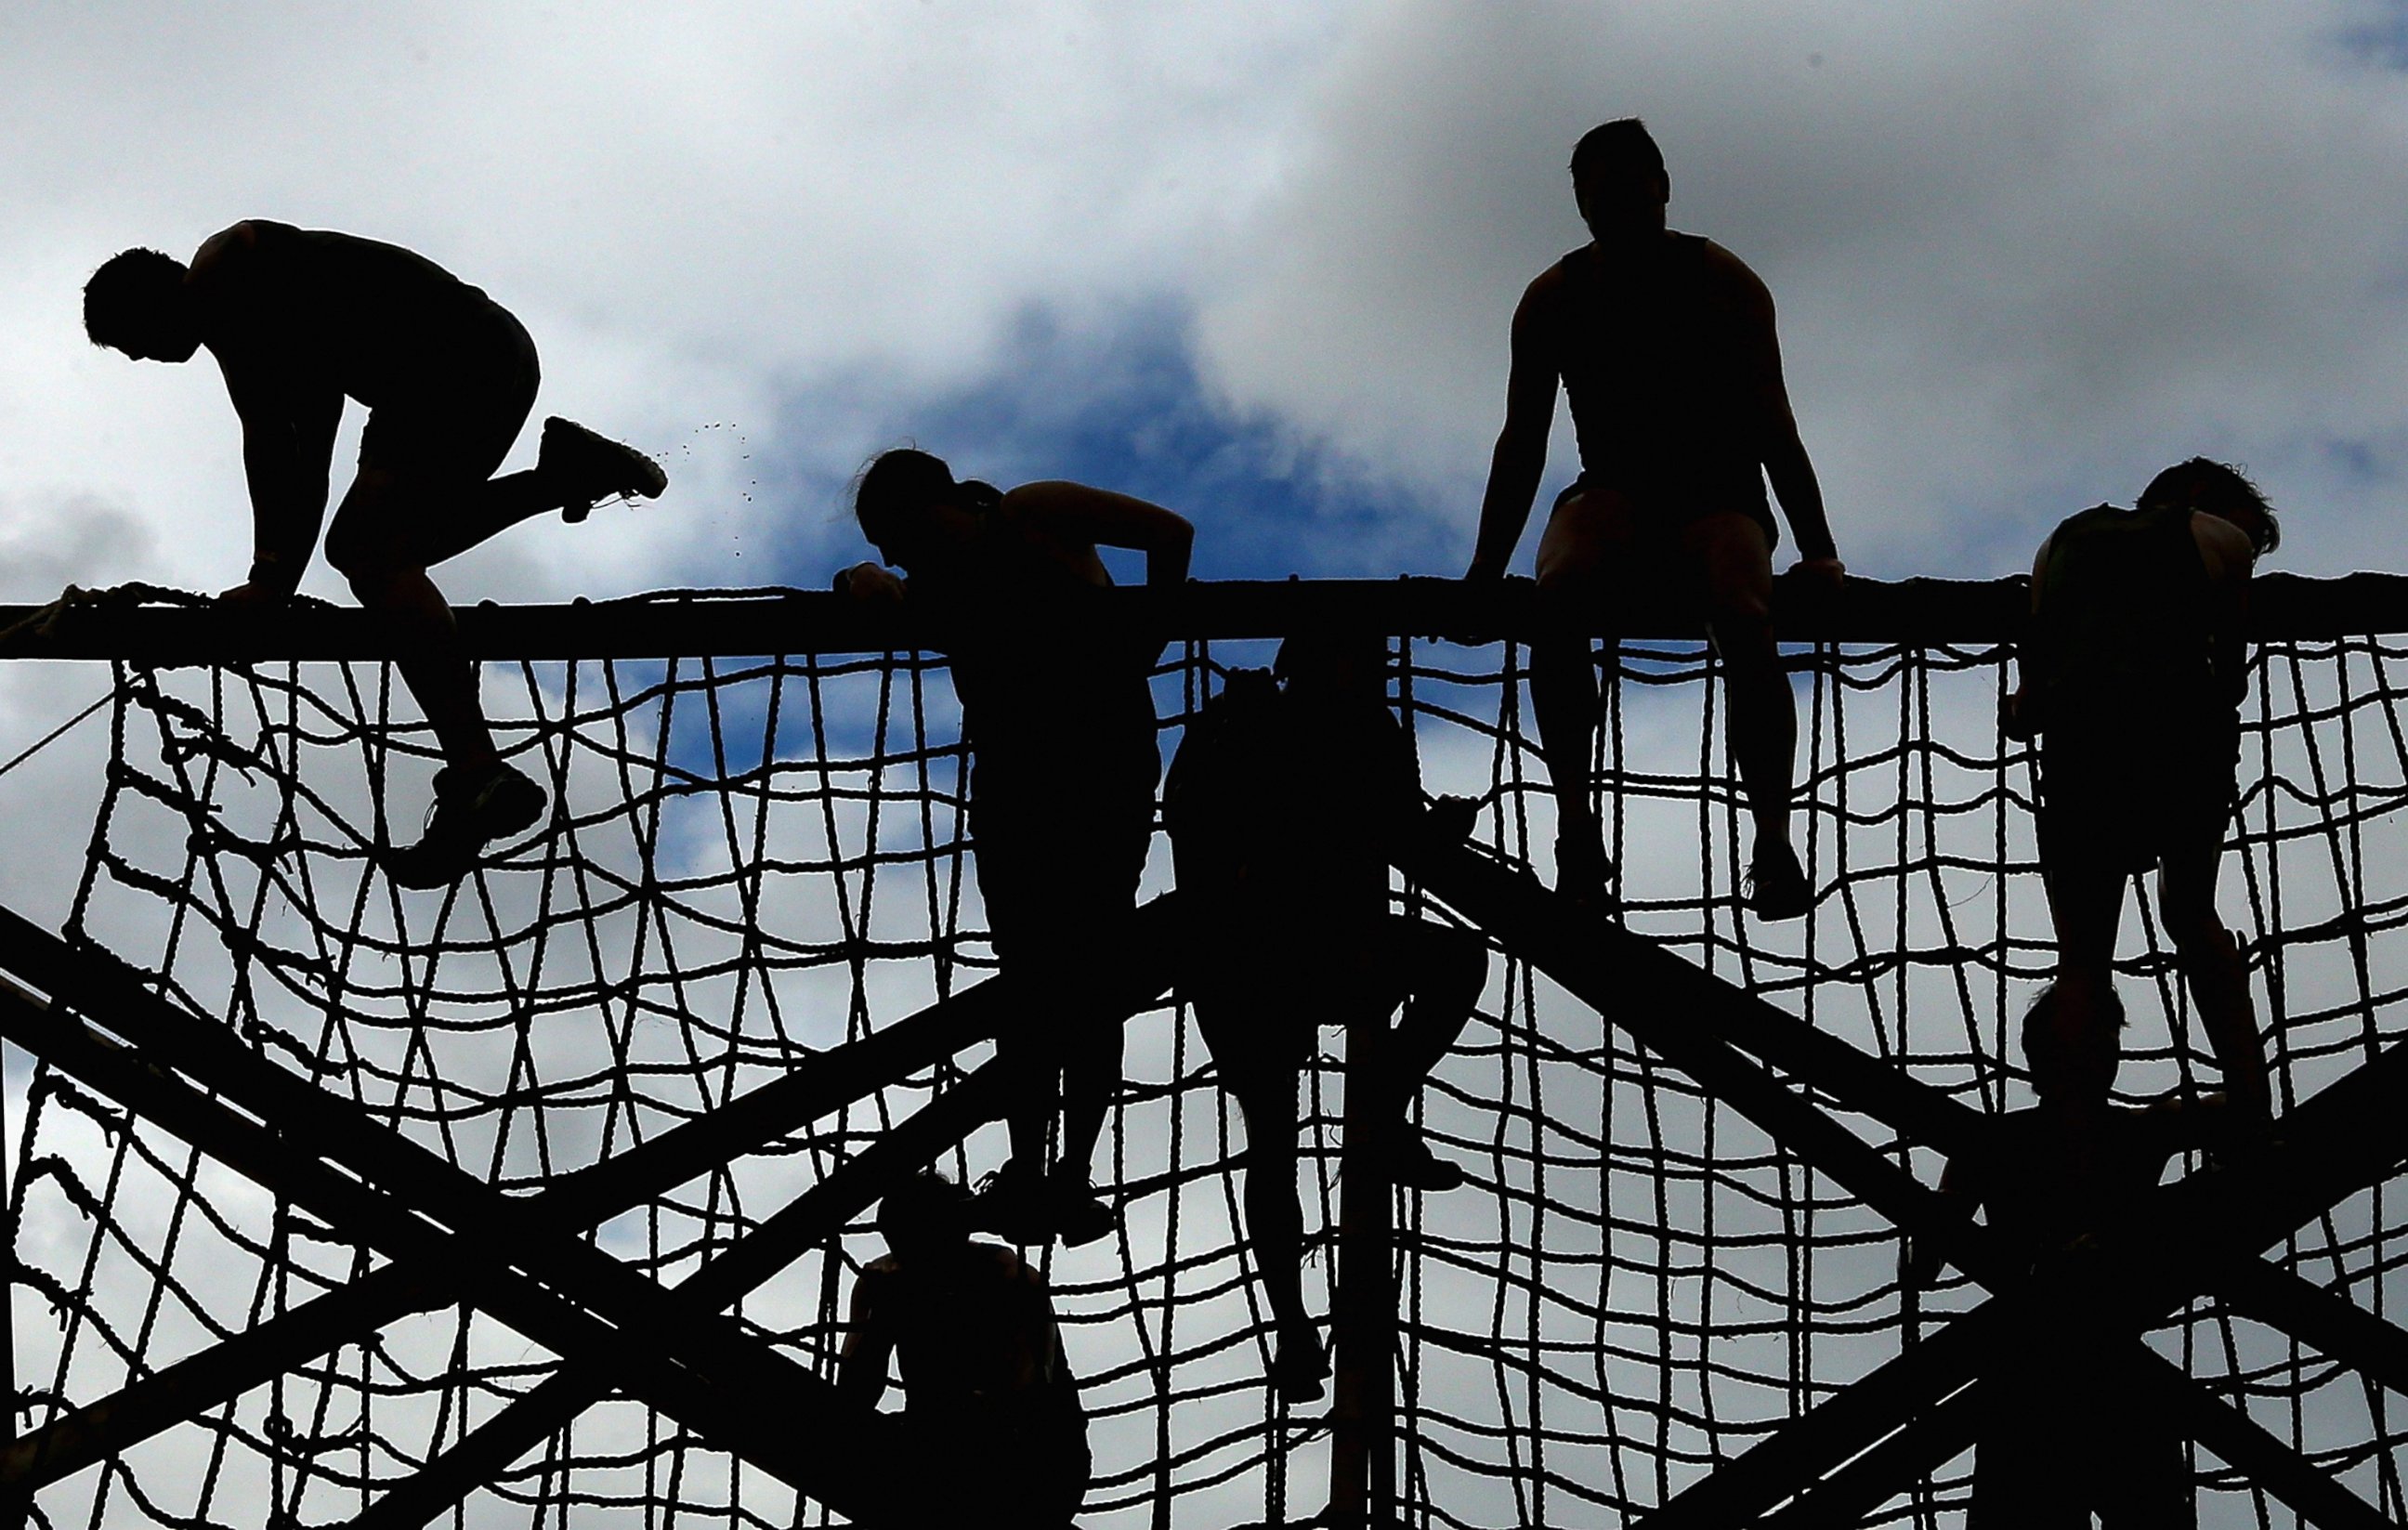 PHOTO: Competitors climb up a rope net during Toughmudder at Phillip Island Grand Prix Circuit, March 23, 2014 in Phillip Island, Australia.